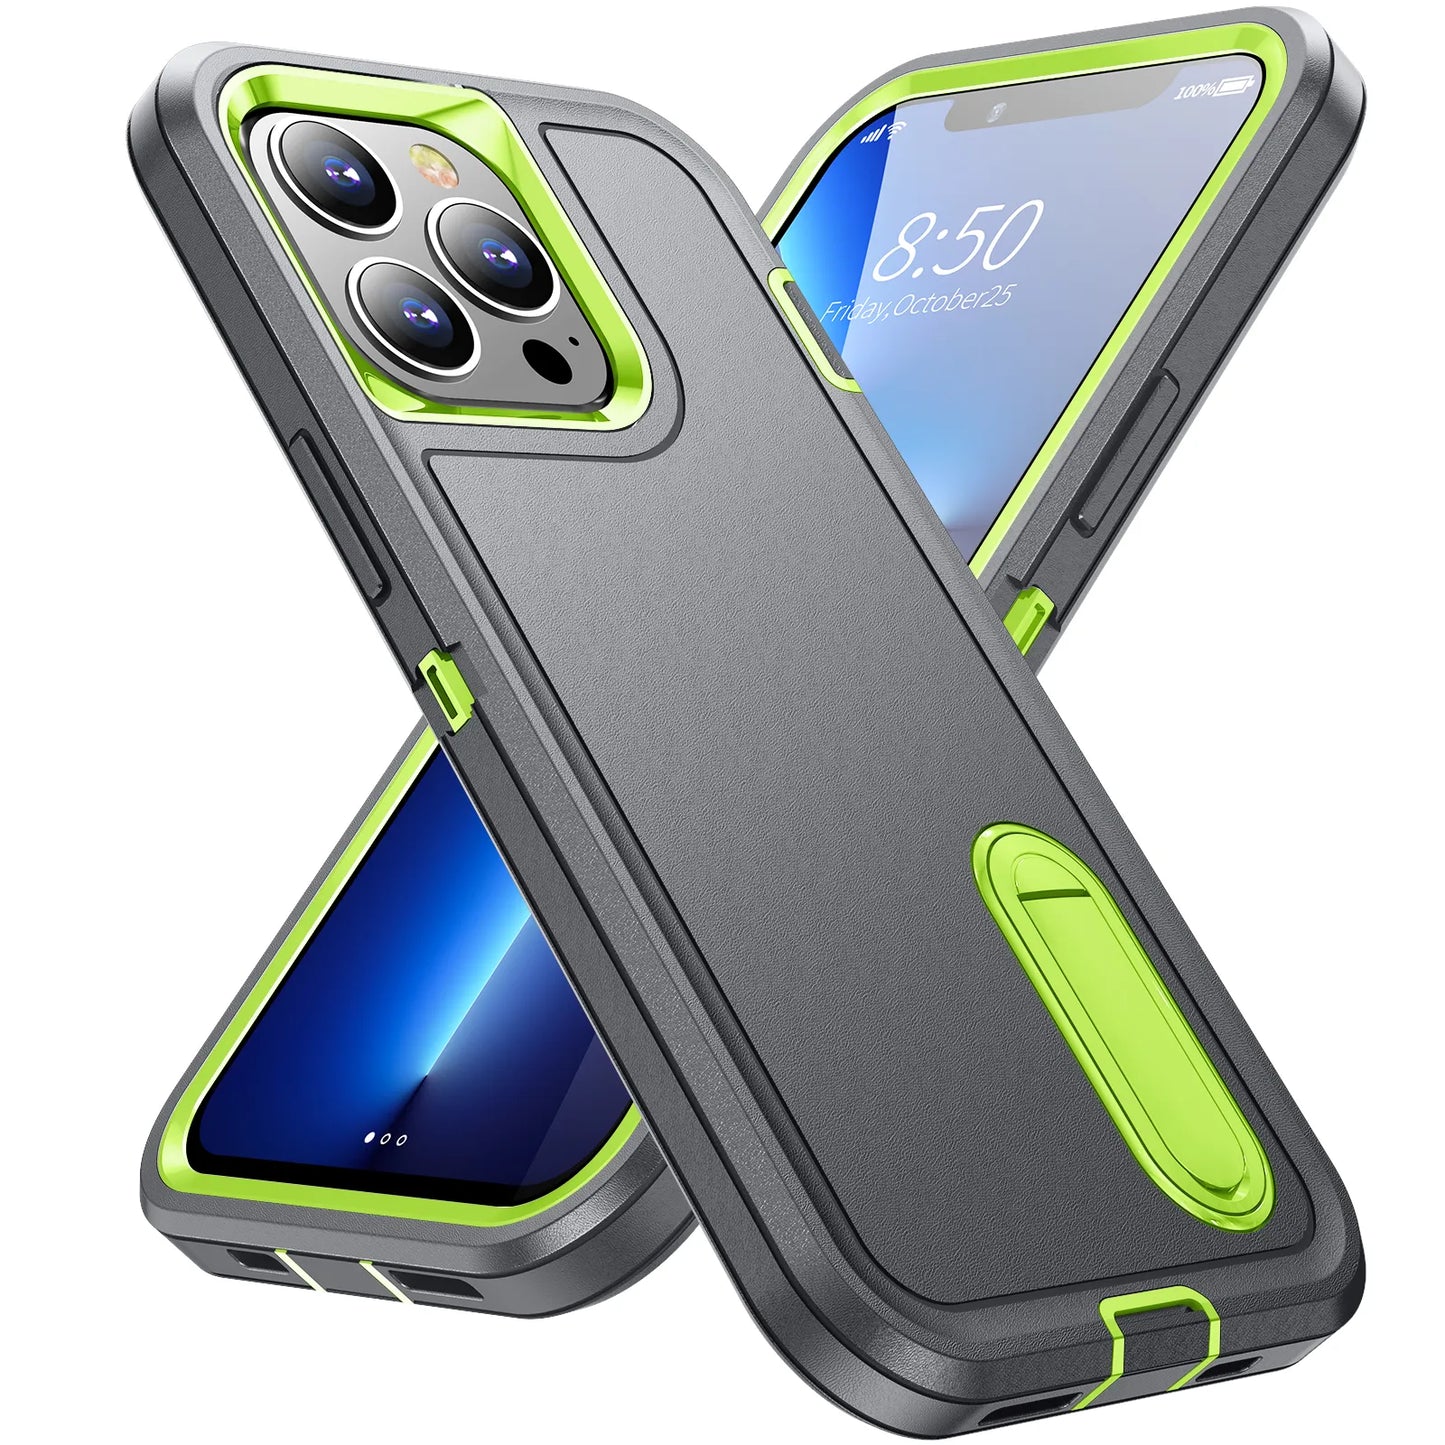 Defend Heavy Armour Shockproof iPhone Case - Grey & Green